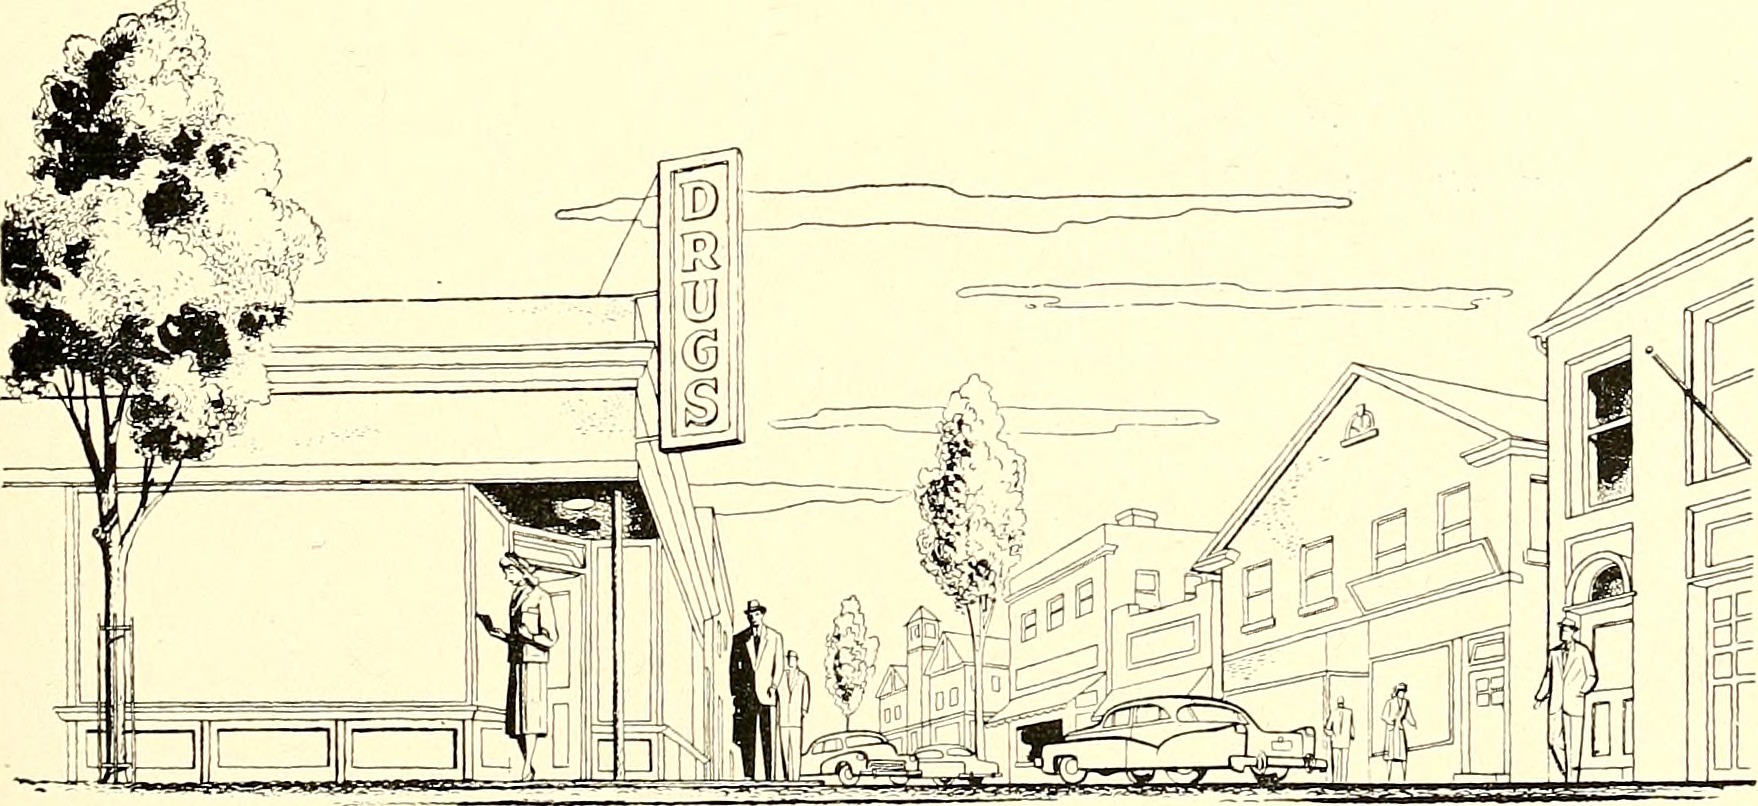 Image from page 24 of "Annual report of the North Carolina Board of Pharmacy [serial]" (1882)